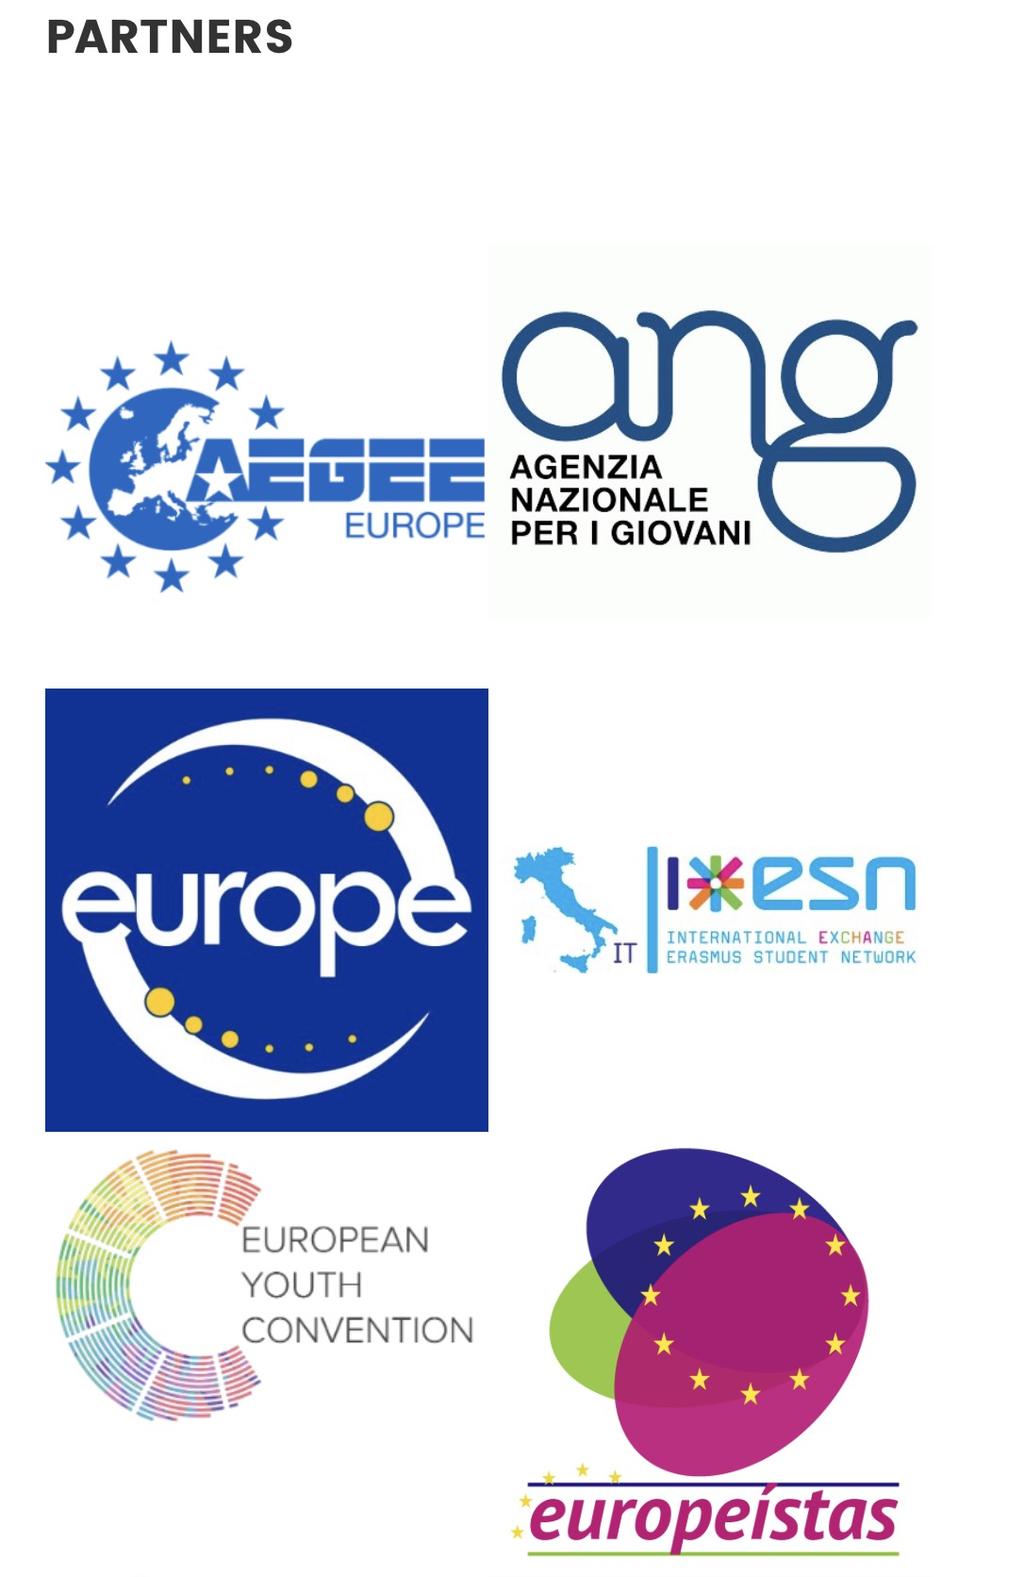 Europeístas has developed three working groups (WGs), one for each main topic: modern family, sustainability and Europe.